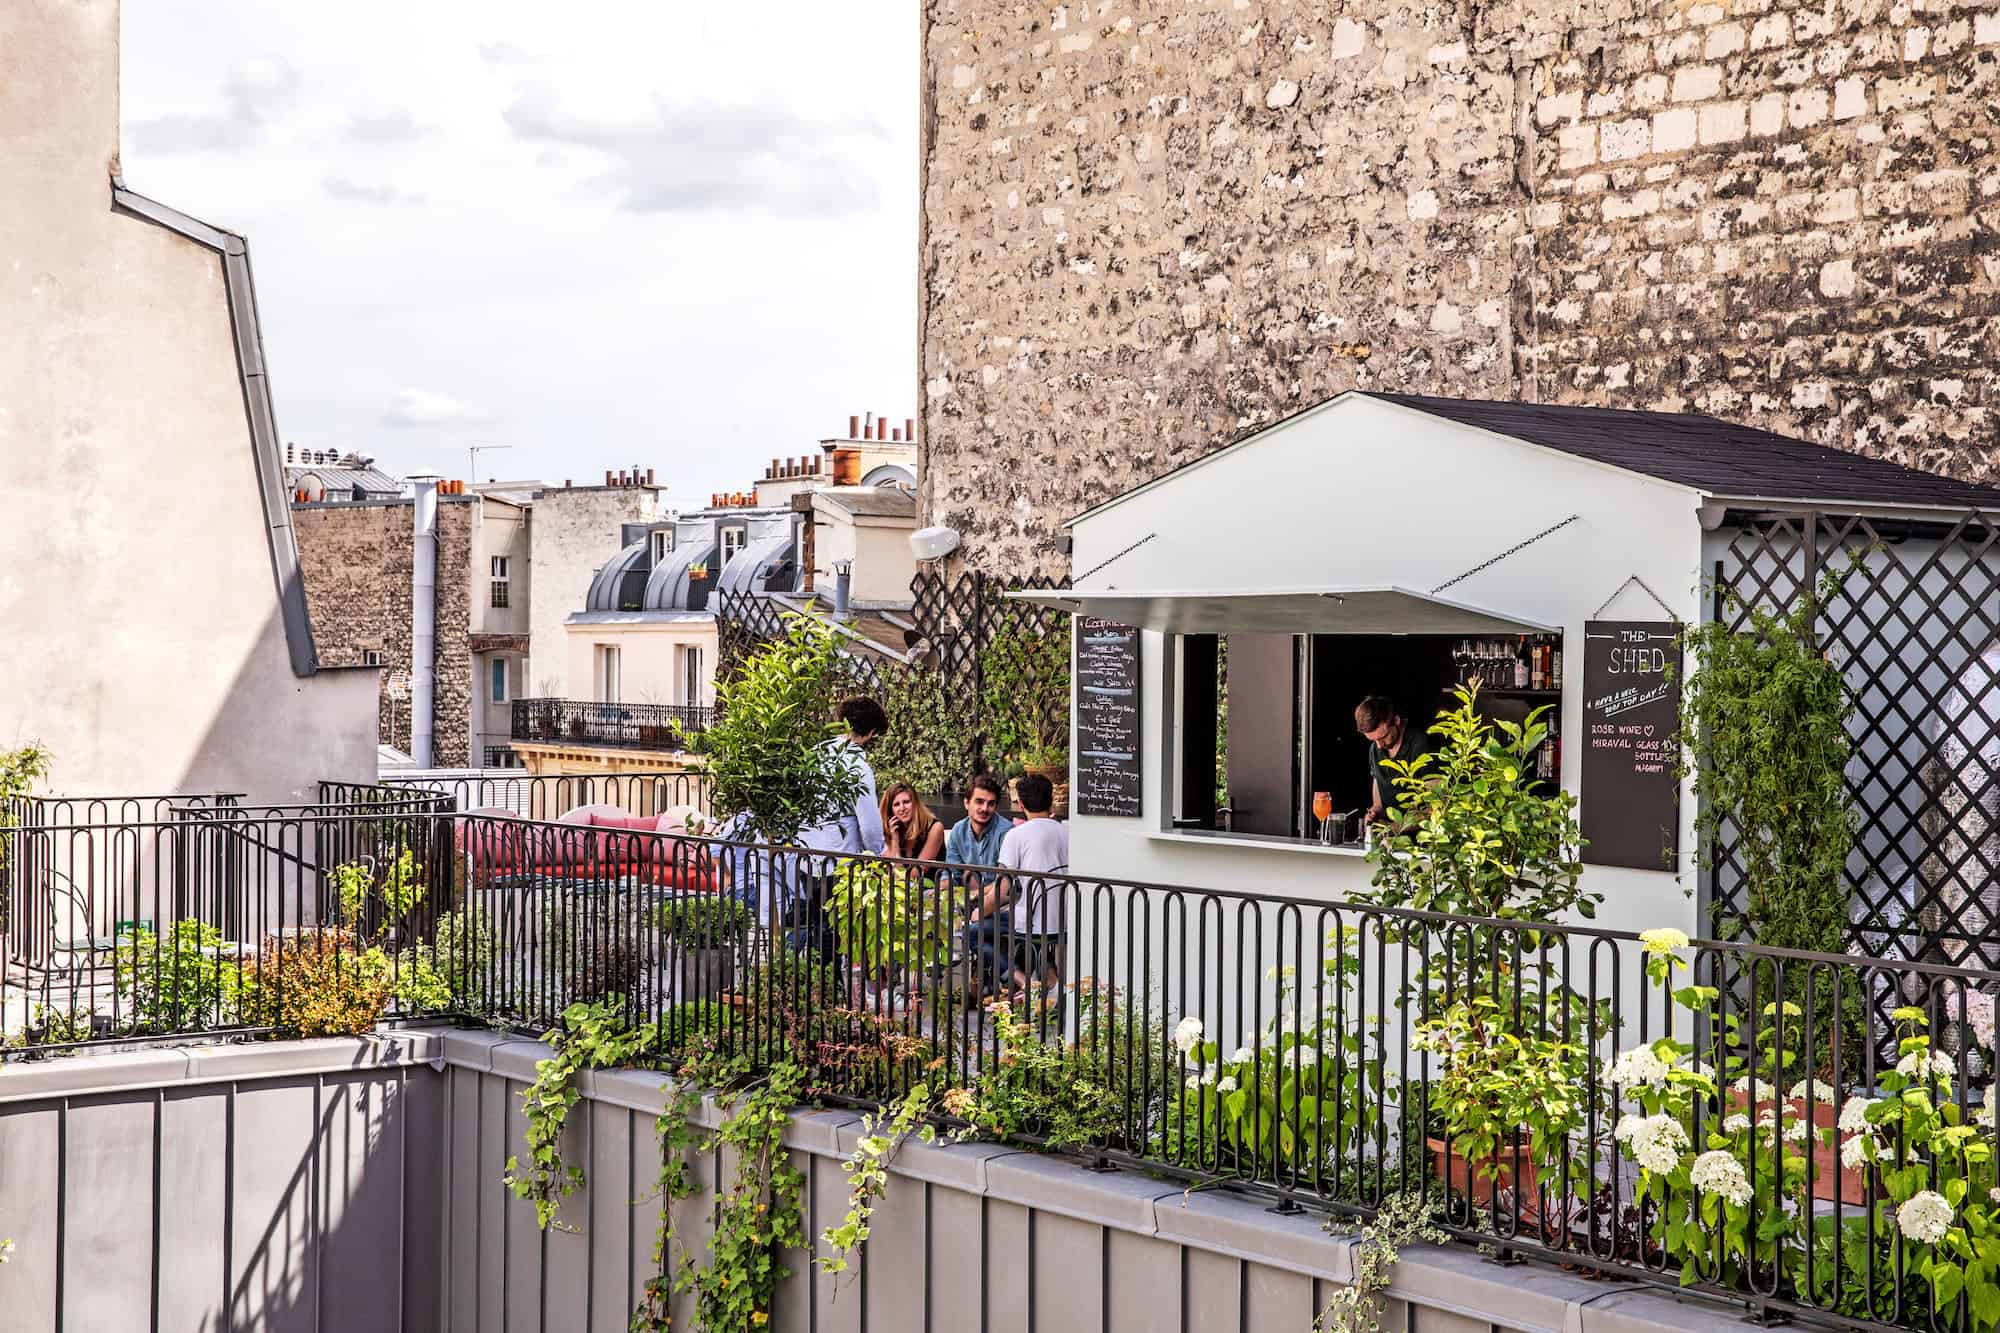 The Shed is one of the best Paris rooftop bars for summer cocktails with views of the surrounding Parisian chimney tops.